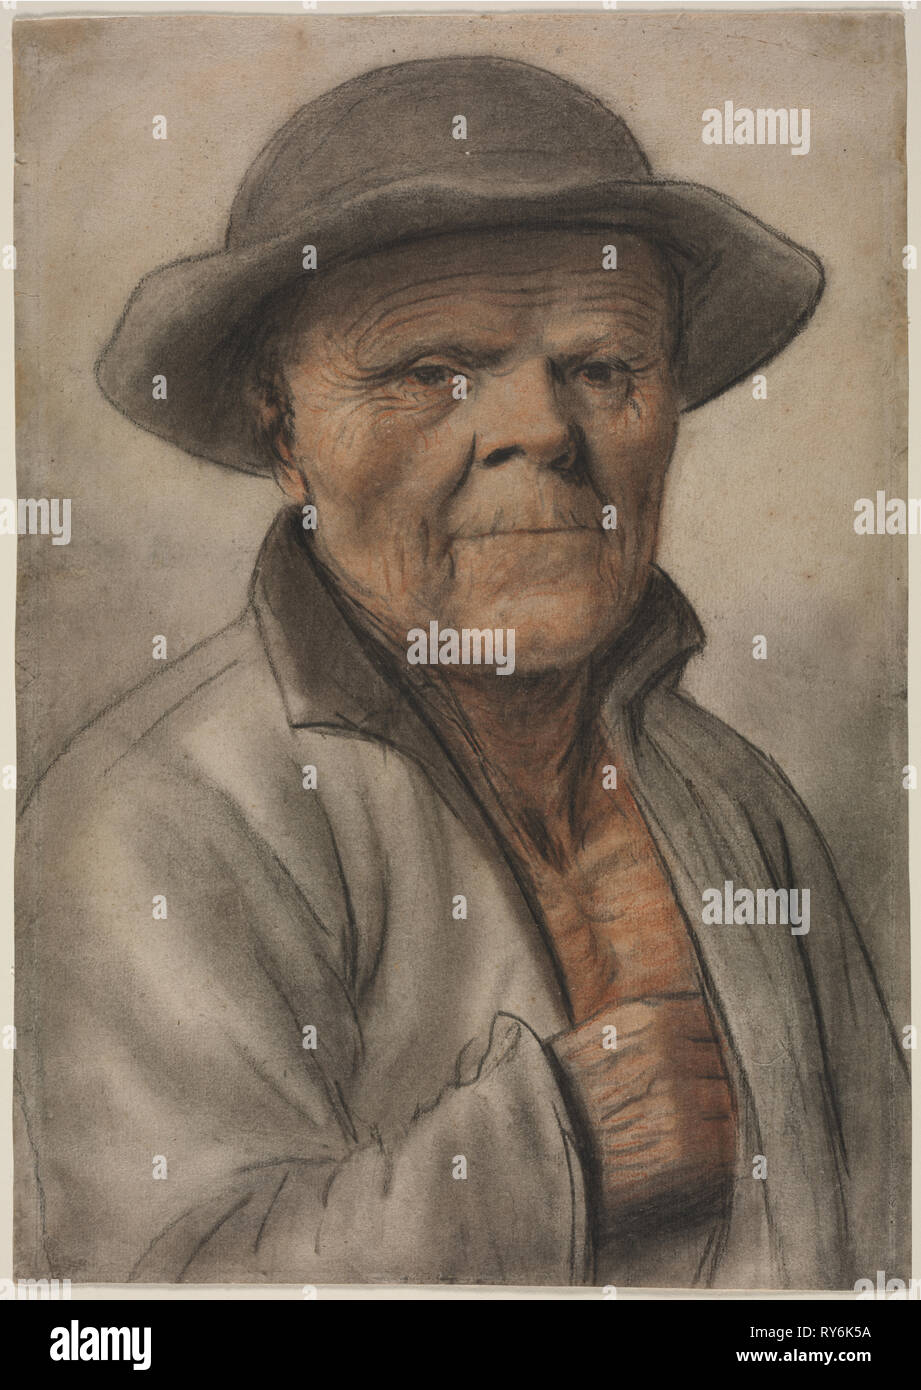 Portrait of an Old Man, 1600s?. Manner of Nicolas Lagneau (French, 1590-1666). Black, red and brown chalk, with stumping; sheet: 38.9 x 27.7 cm (15 5/16 x 10 7/8 in Stock Photo